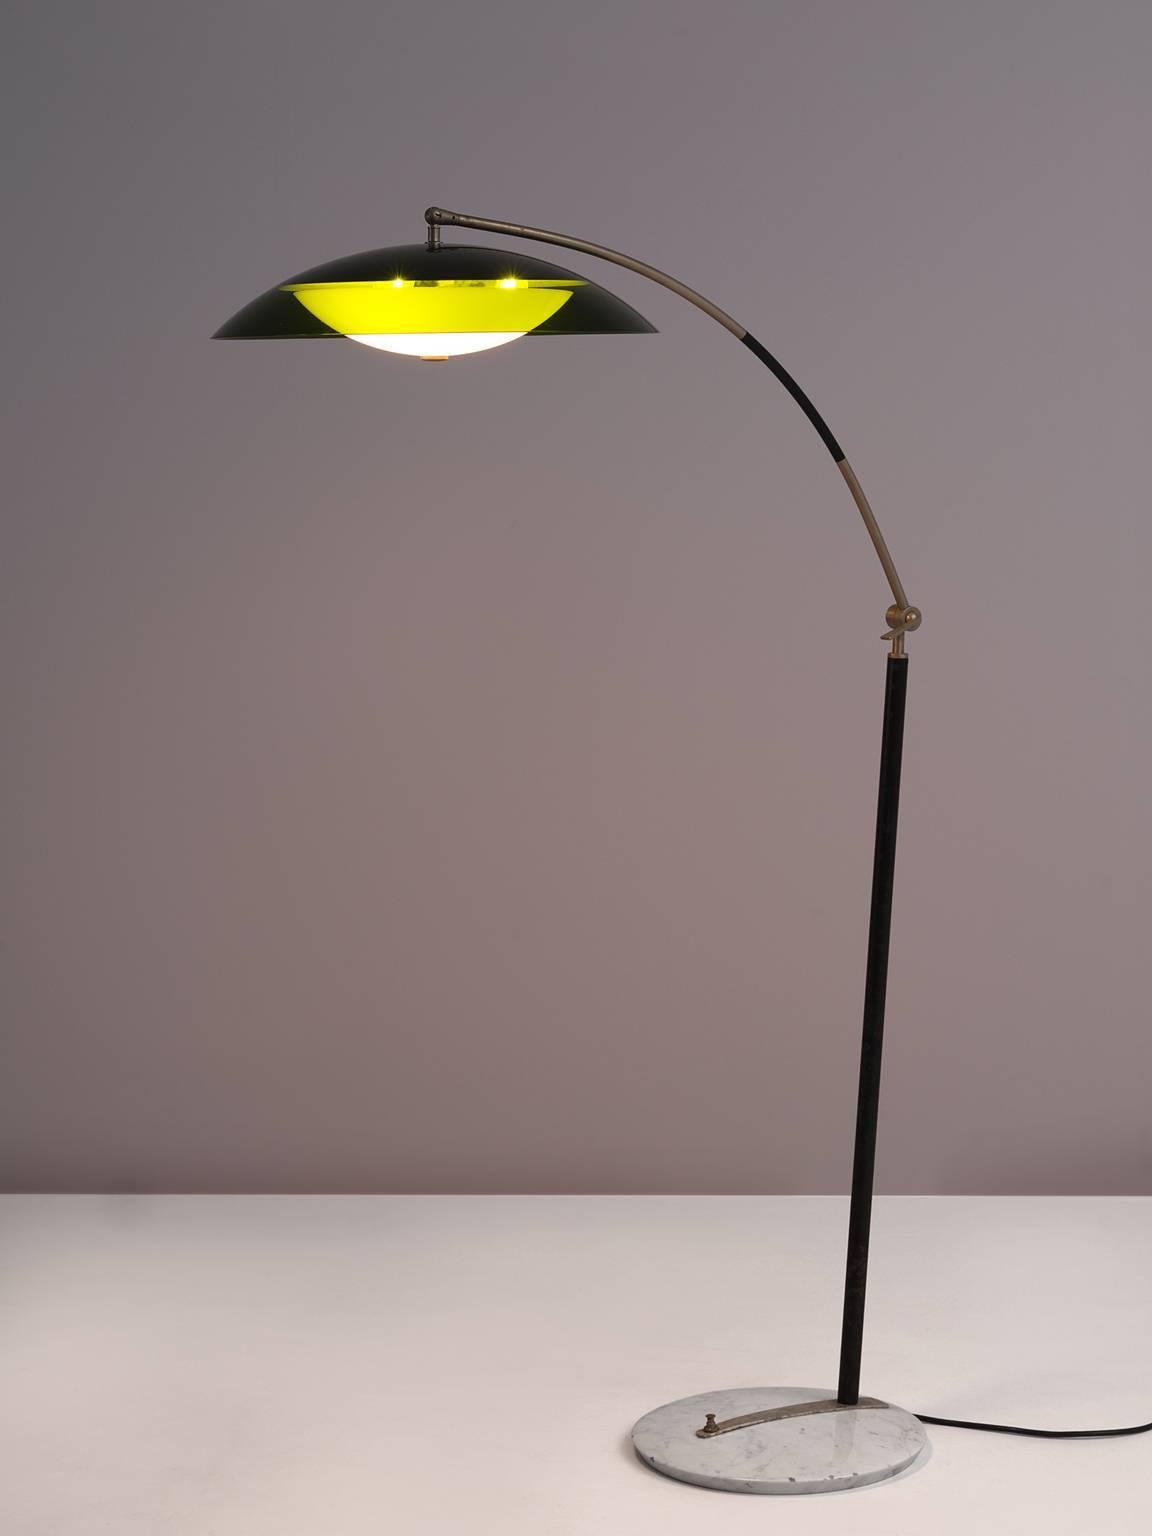 Stilux Milano, floor lamp, green acrylic shade, metal stem, brass foot, Italy, circa 1970

This Italian floor lamp features a round marble base and has a long metal stem that can be adjusted according to the user's wishes. The shade of the lamp is